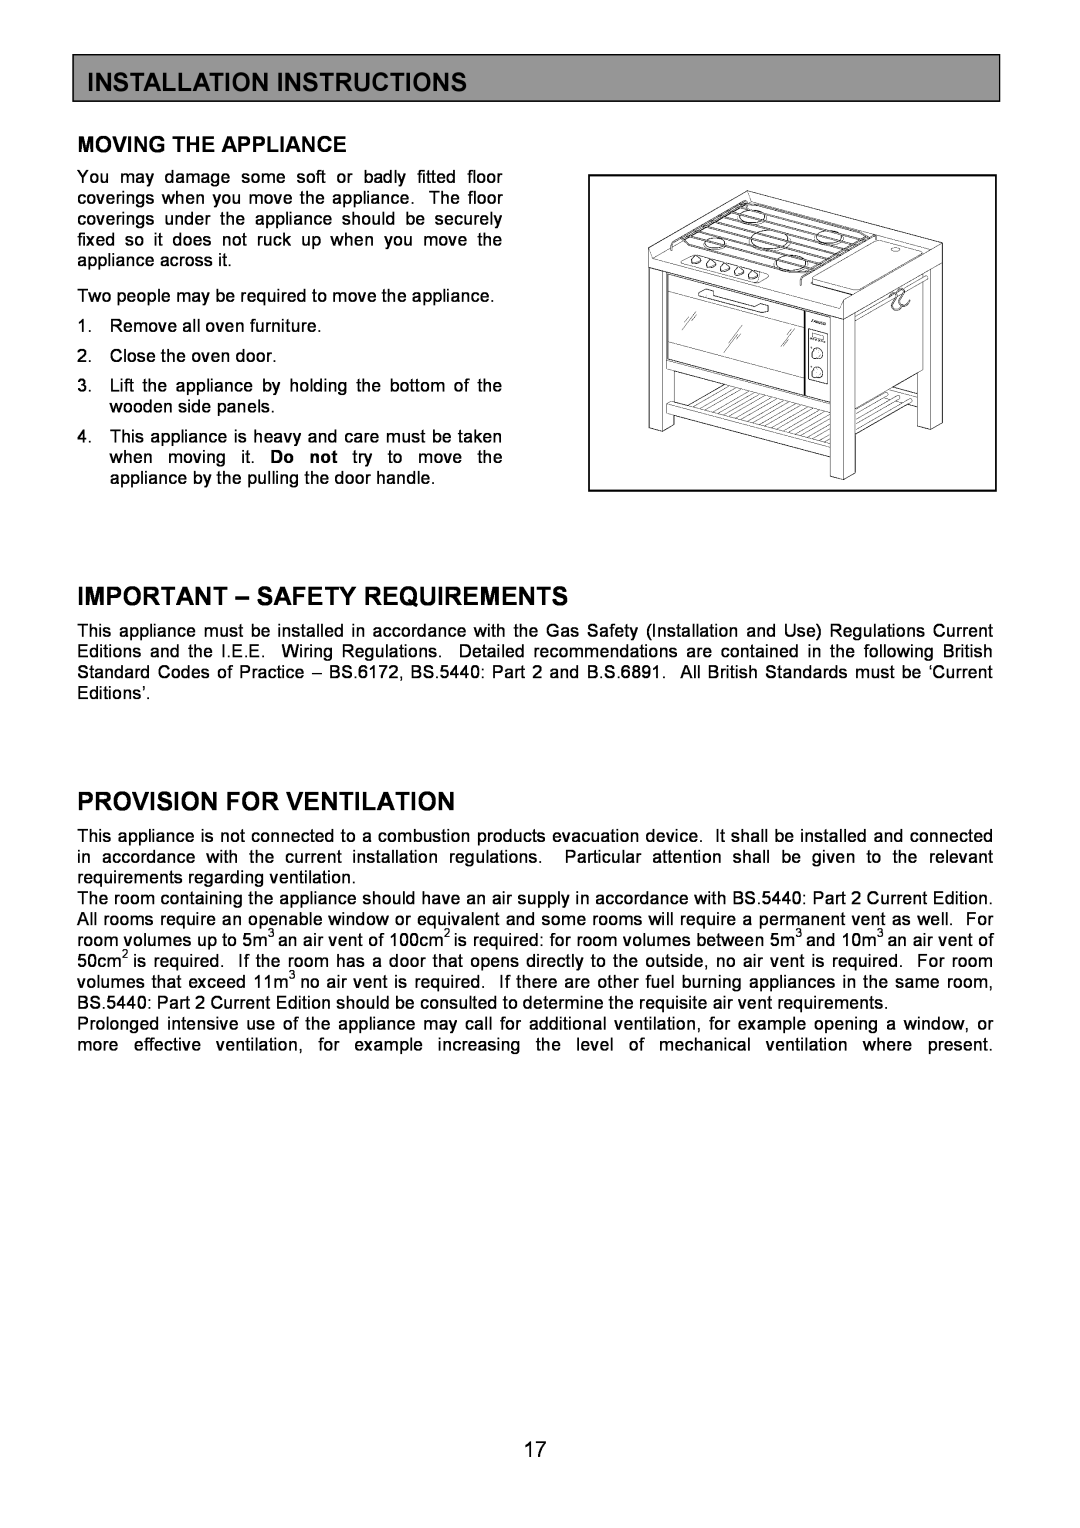 Zanussi ZCM 1000X manual Important - Safety Requirements, Provision For Ventilation, Moving The Appliance 